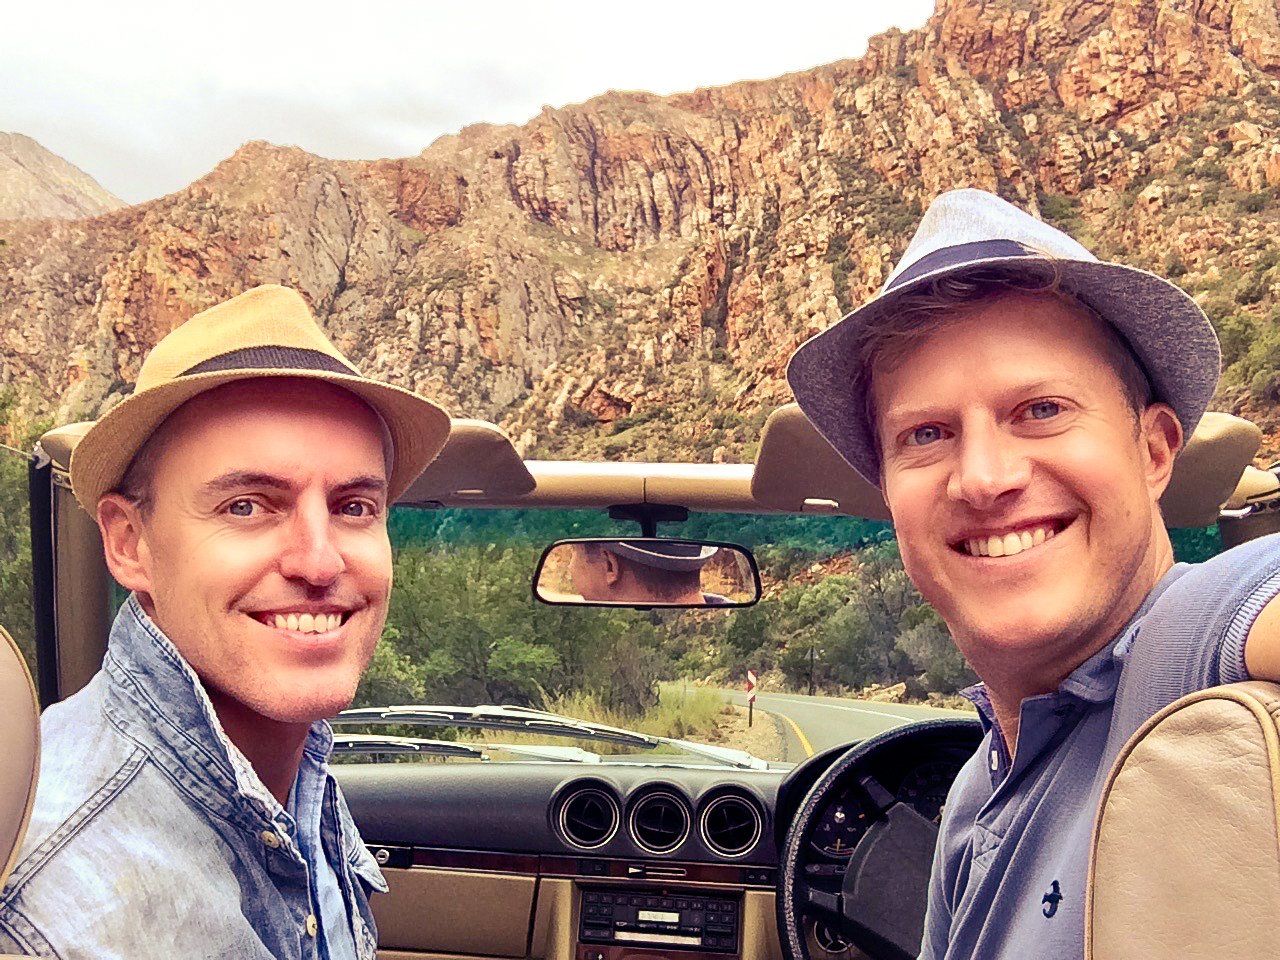 JD & François busy exploring exciting African destinations :)